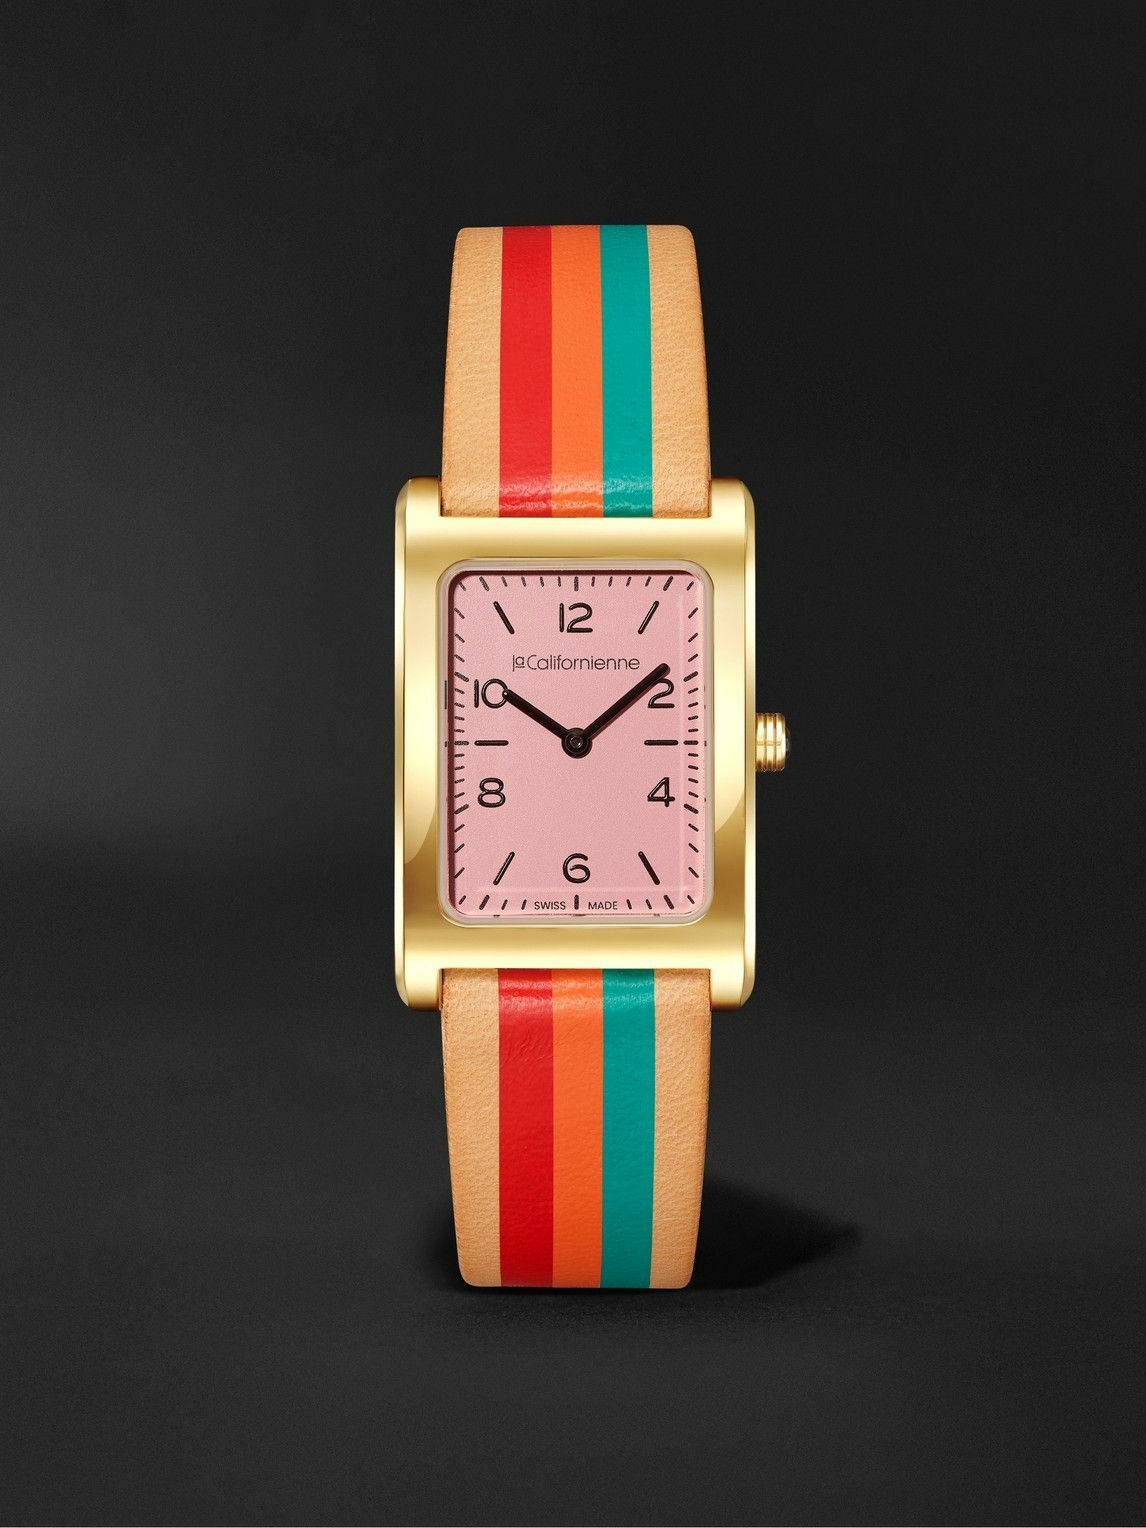 laCalifornienne - Daybreak 24mm Gold-Plated and Leather Watch, Ref. No ...